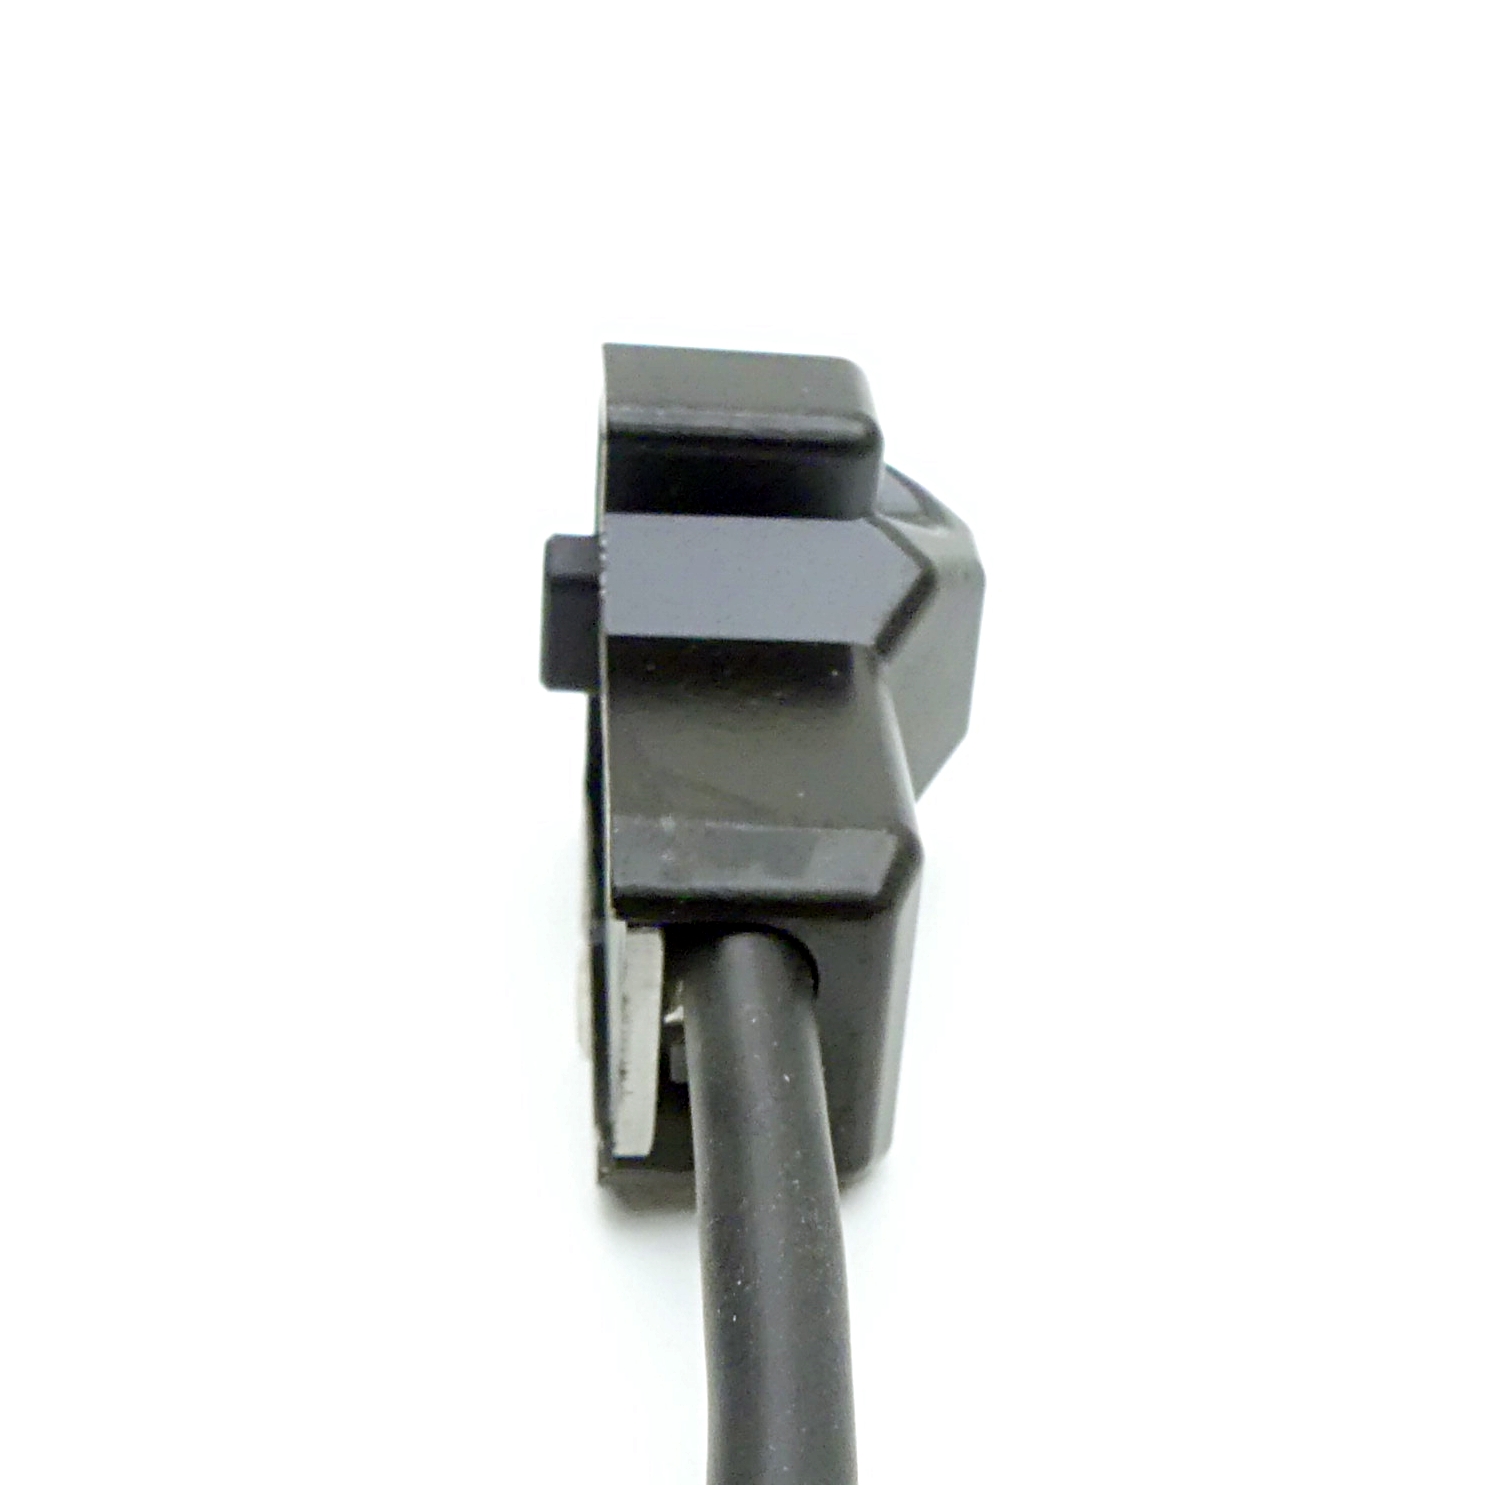 USB 2.0, Standard cable, angled, screwable 